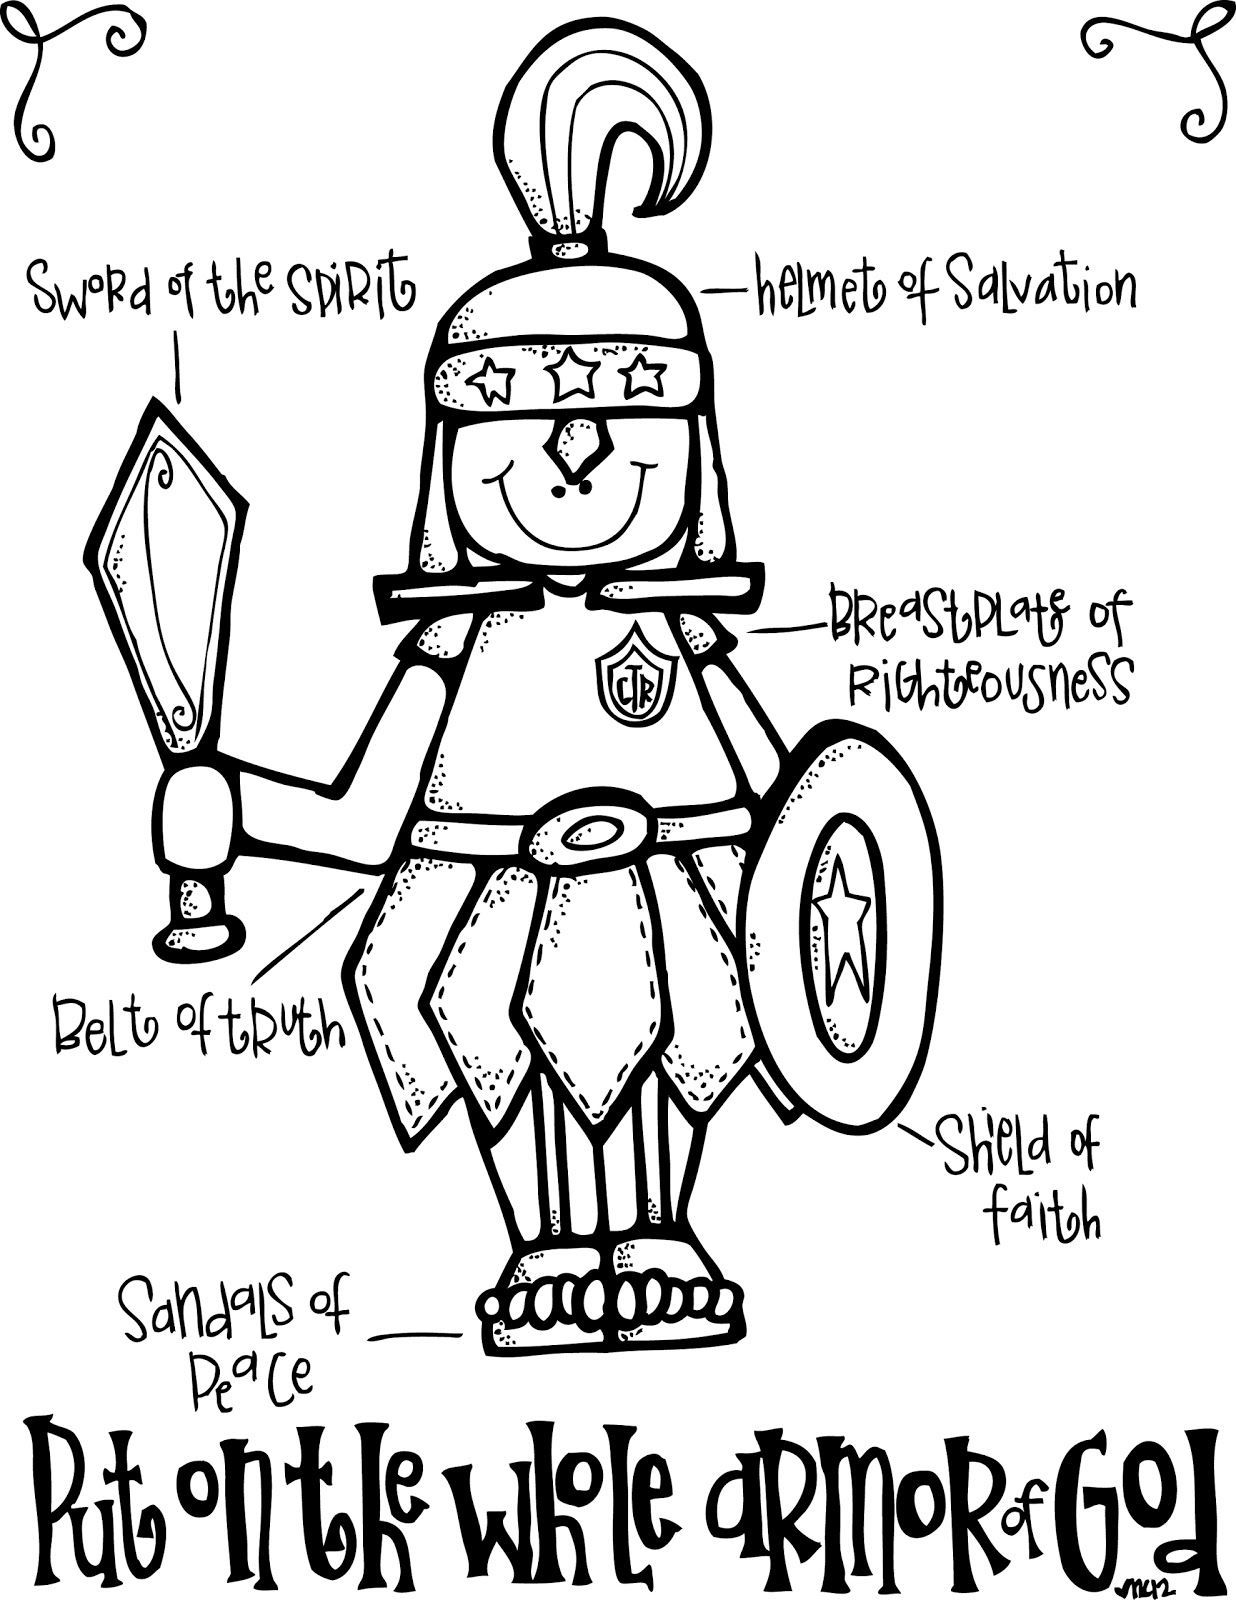 Armor Of God Coloring Pages At Getcolorings Free Printable Colorings Pages To Print And Color